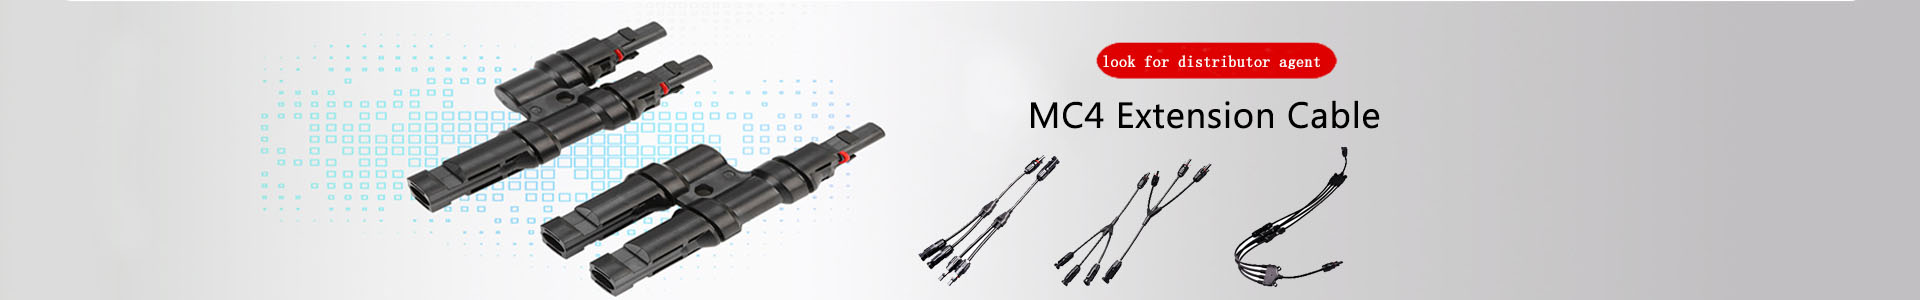 The role and application of photovoltaic adapters-Industry news-Solar | solar connector,solar branch connector,diode fuse connector,MC4 extnsion cable,H1Z2Z2 solar cable, UL4703 solar cable | Leading manufacturer and supplier of solar pv cables and connectors